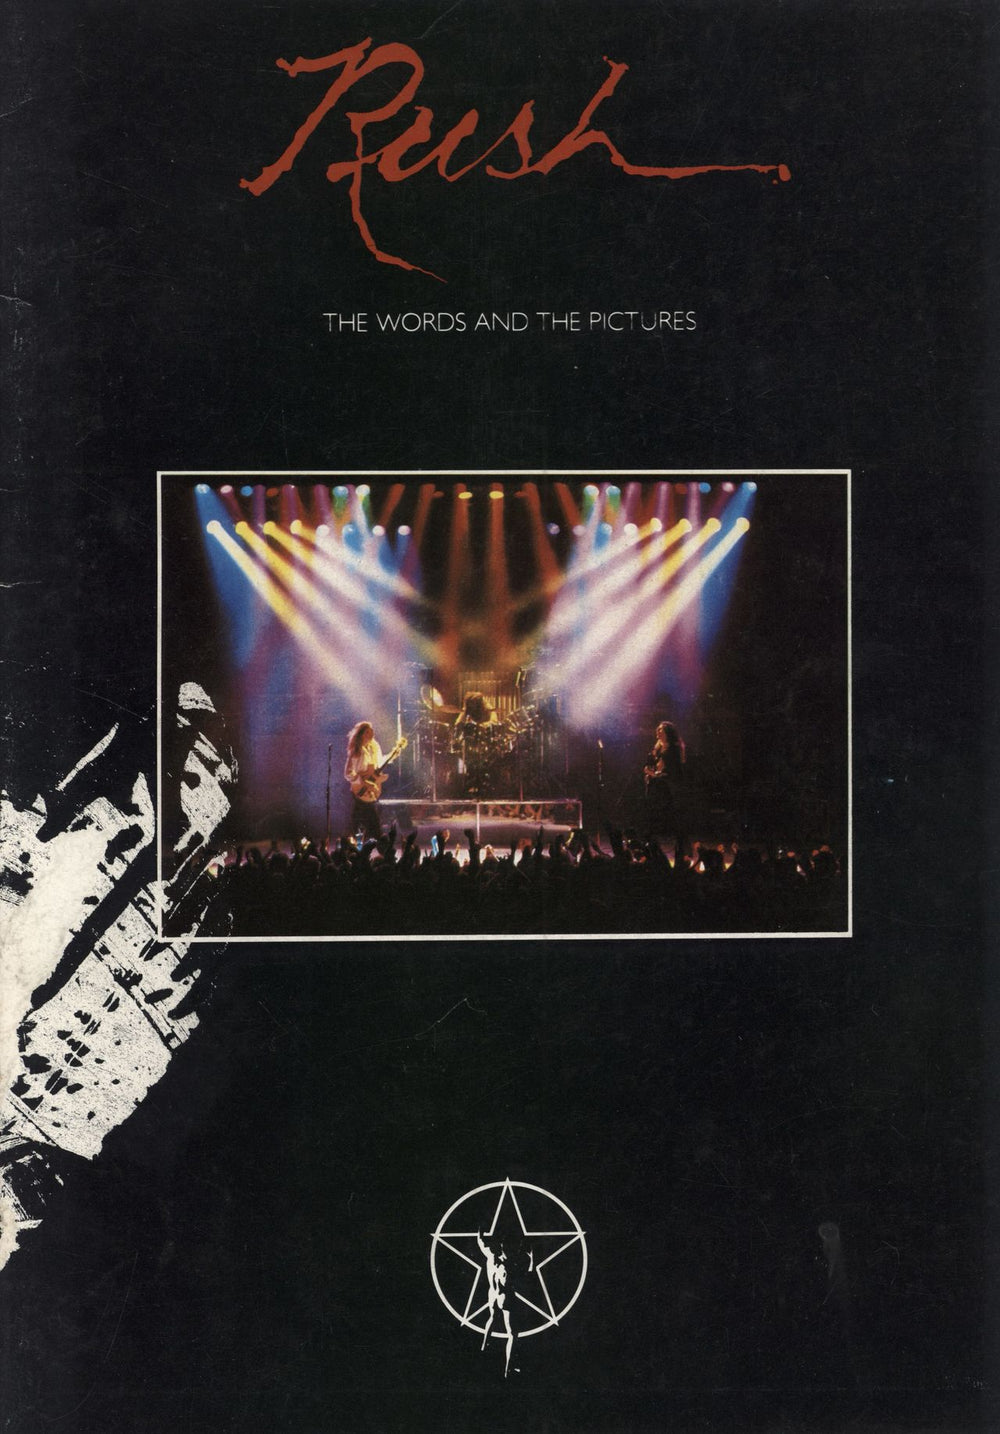 Rush The Words & The Pictures + Ticket Stub - VG UK tour programme TOUR PROGRAMME